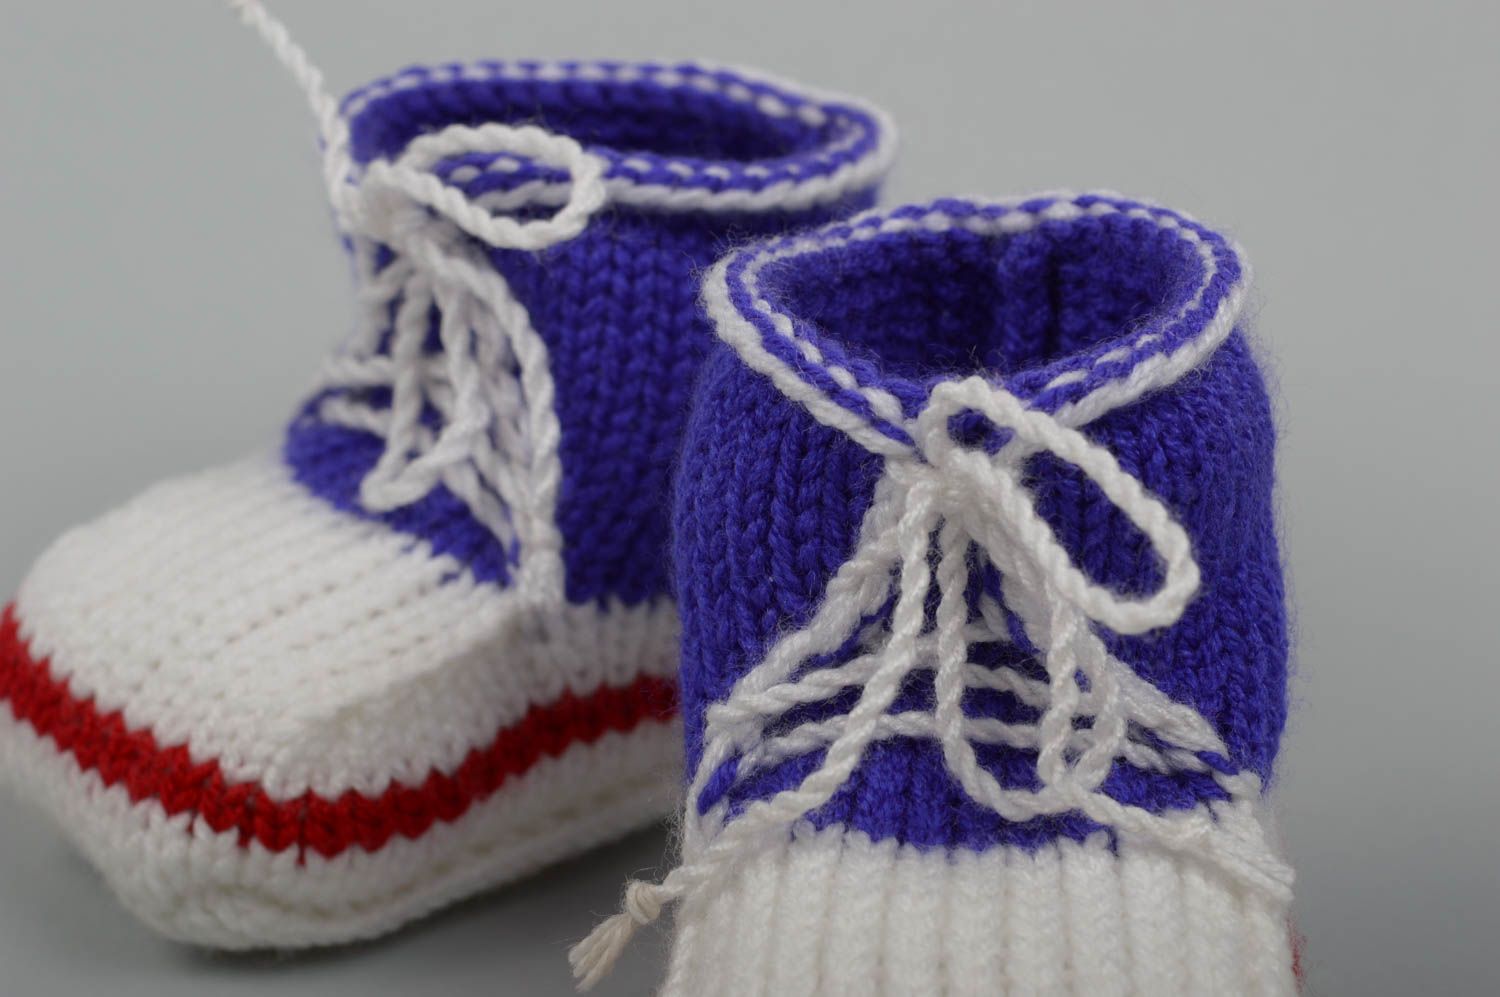 Handmade babies shoes designer clothes for children stylish baby booties photo 2